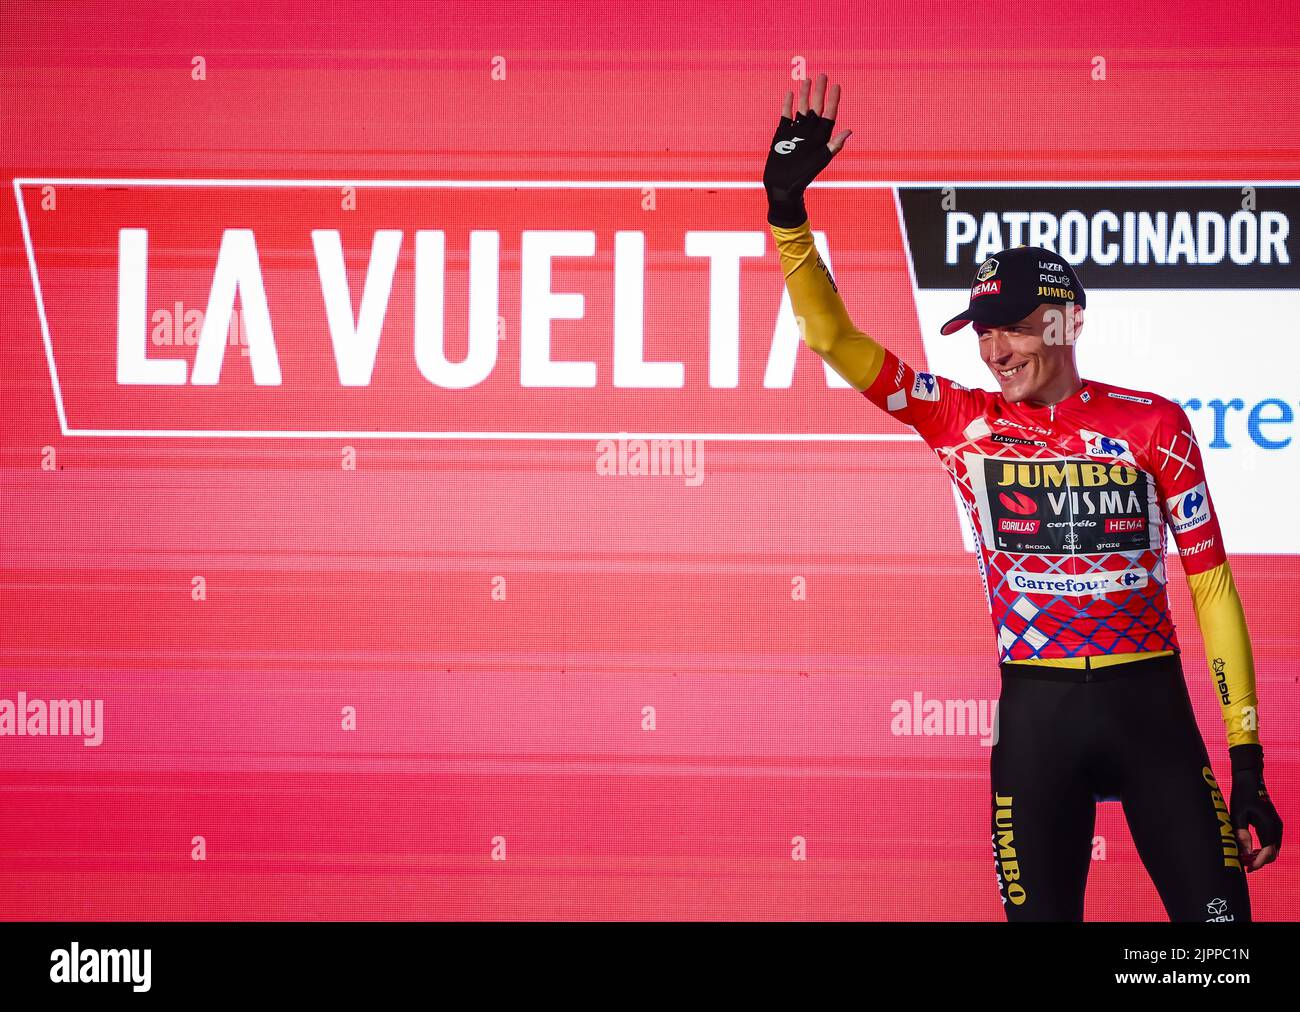 2022-08-19 20:48:10 UTRECHT - Robert Gesink of Team Jumbo-Visma receives the red jersey during the ceremony of the team time trial on the first day of the Tour of Spain (Vuelta a Espana). After a start on the Jaarbeursplein, the teams drove through the streets of the Dom city. ANP VINCENT JANNINK netherlands out - belgium out Stock Photo